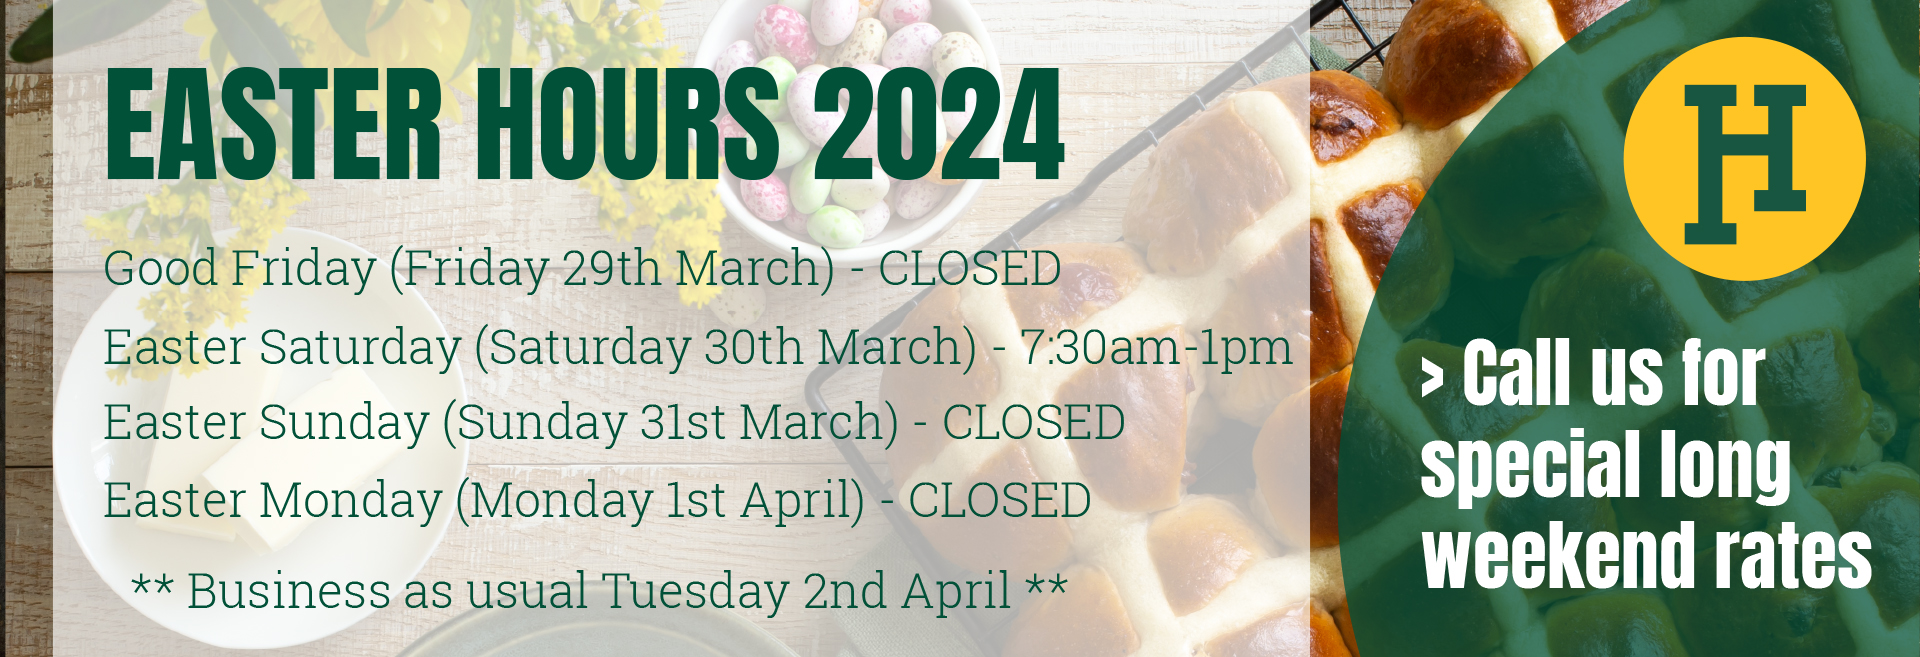 Easter hours 2024